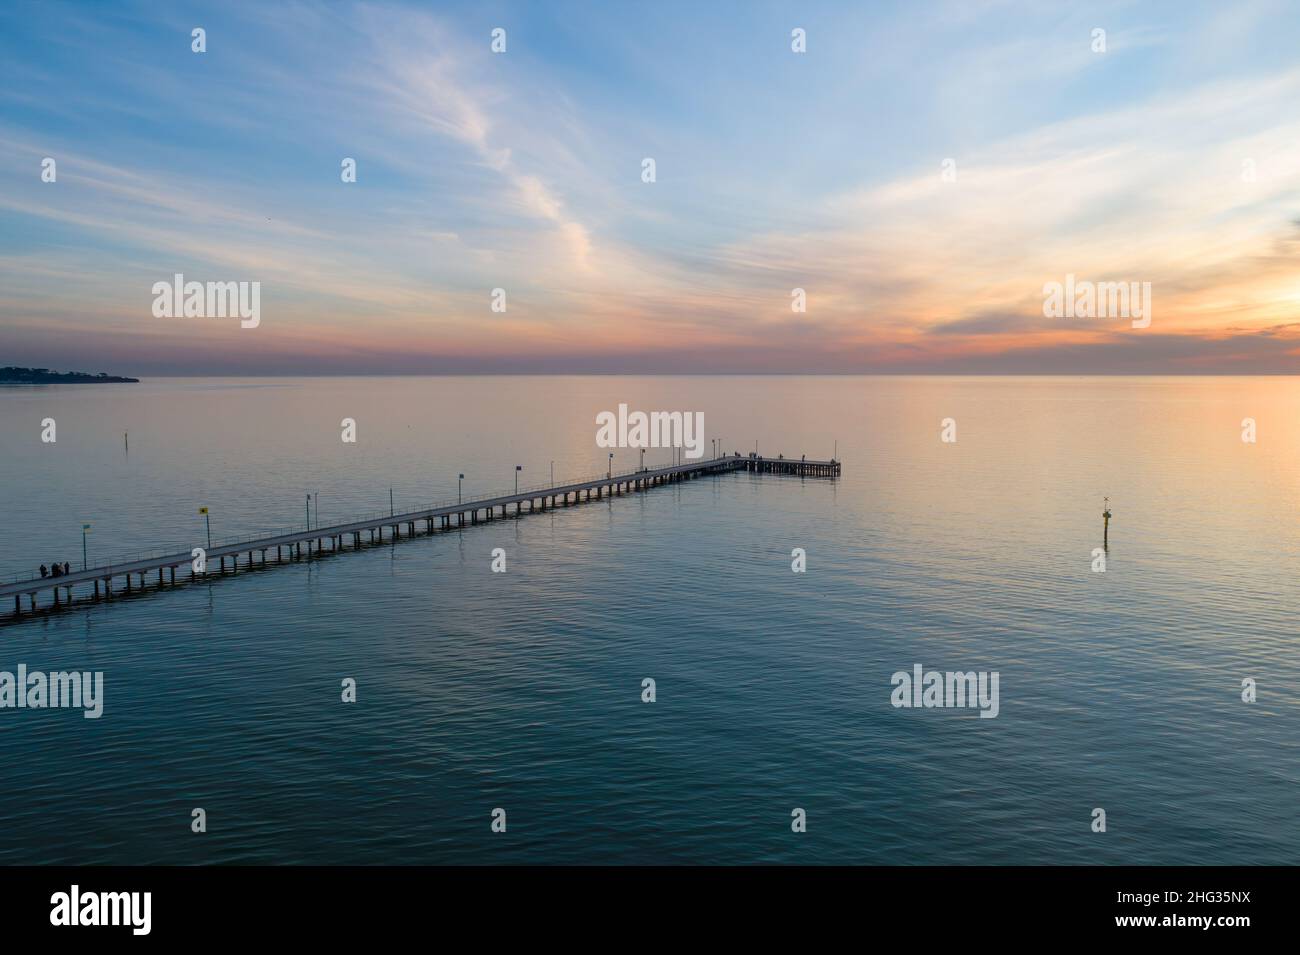 Long wooden pier at sunset - aerial view Stock Photo